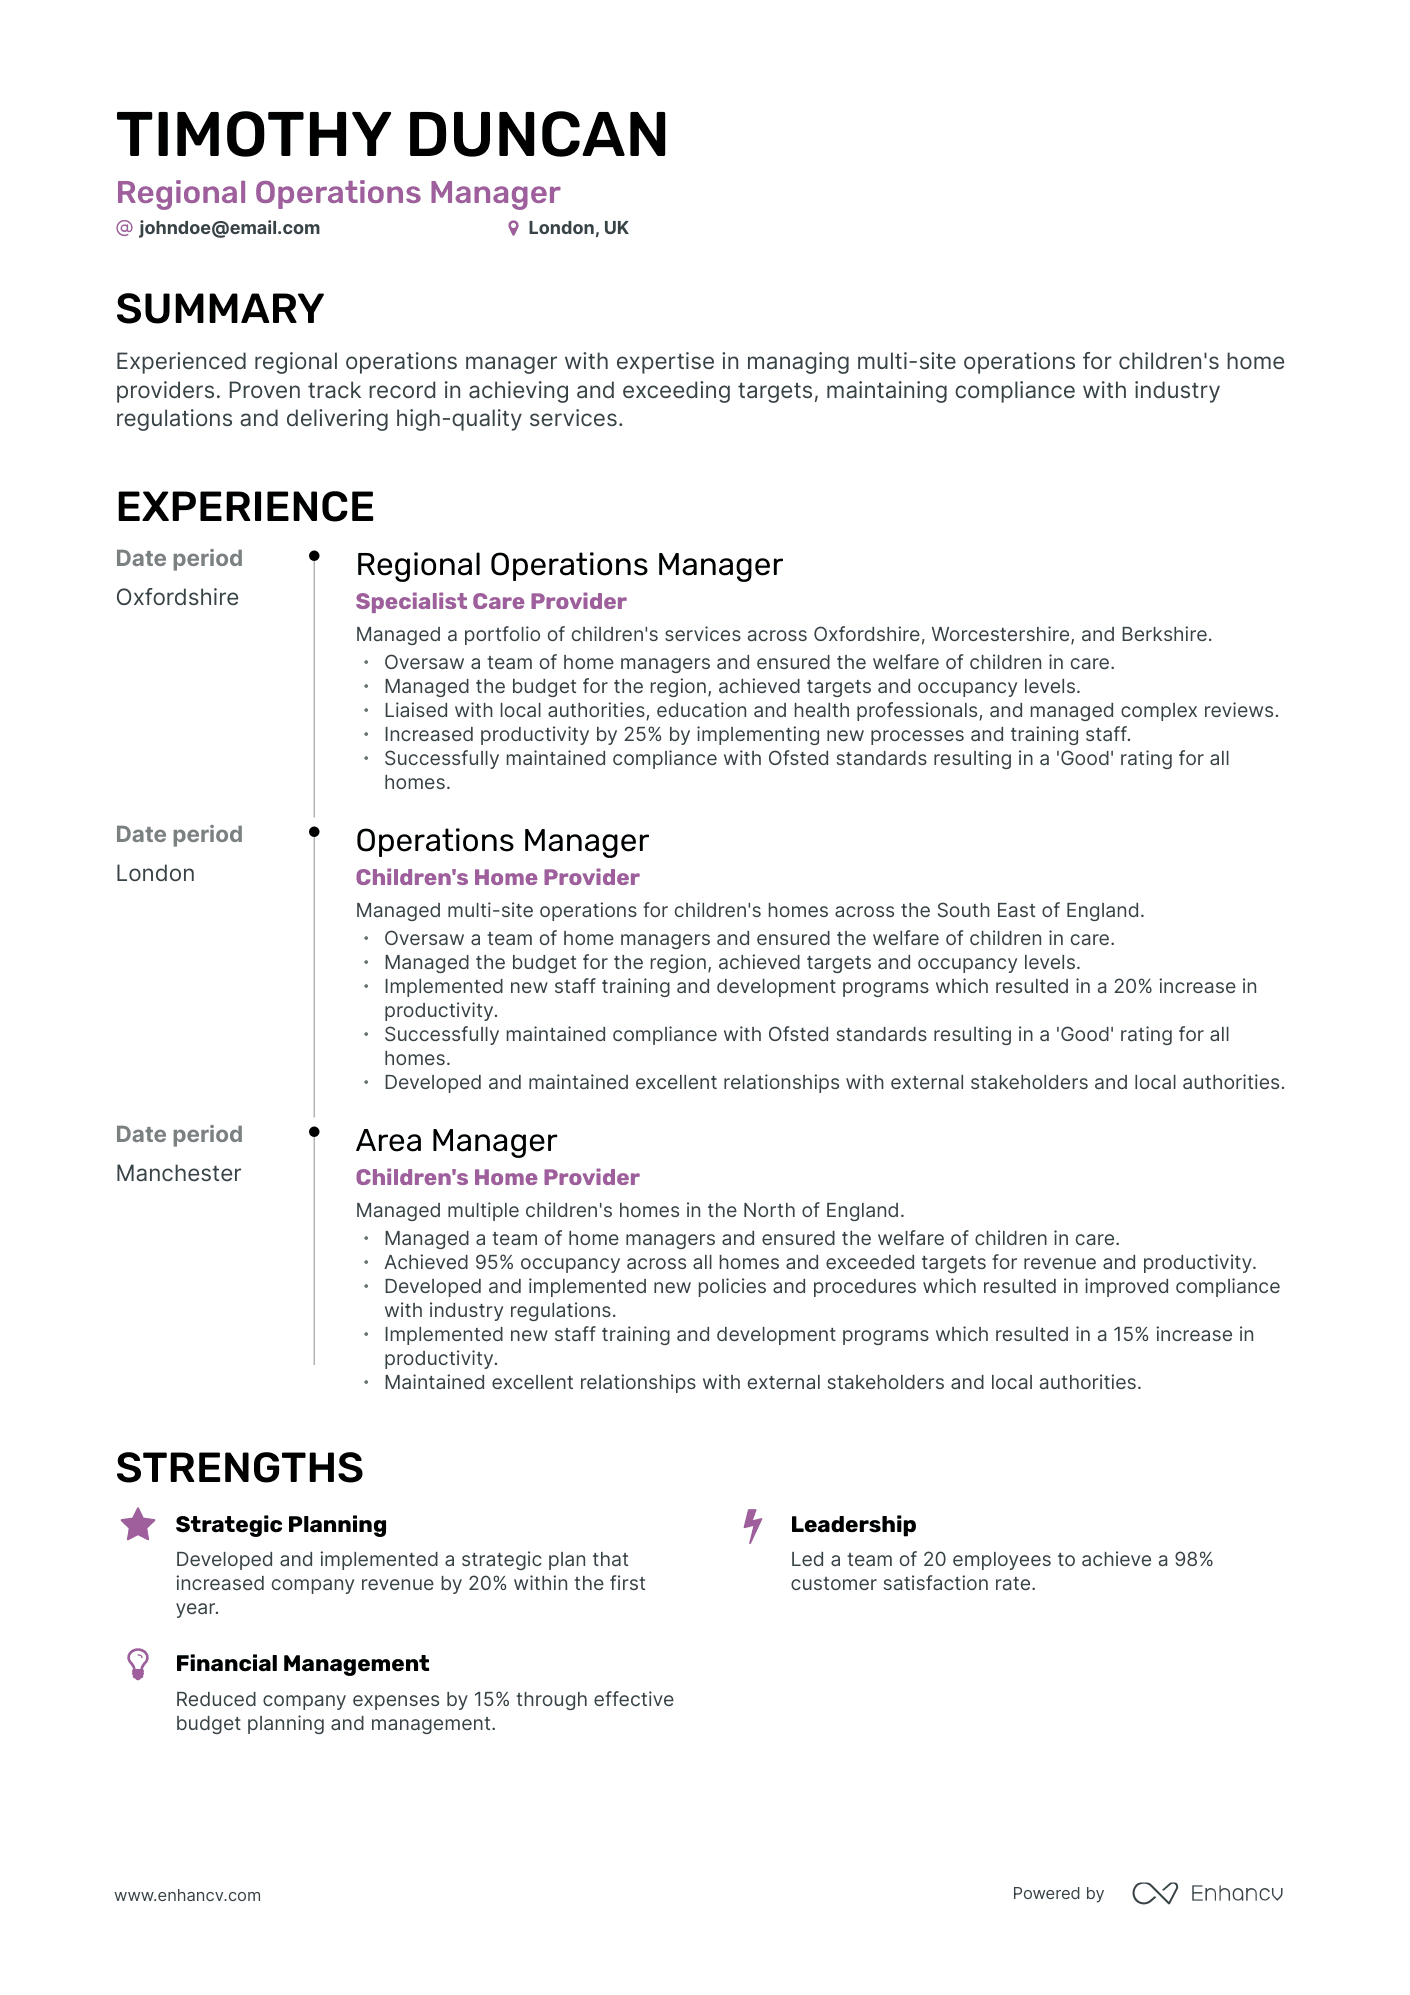 Timeline Regional Operations Manager Resume Template